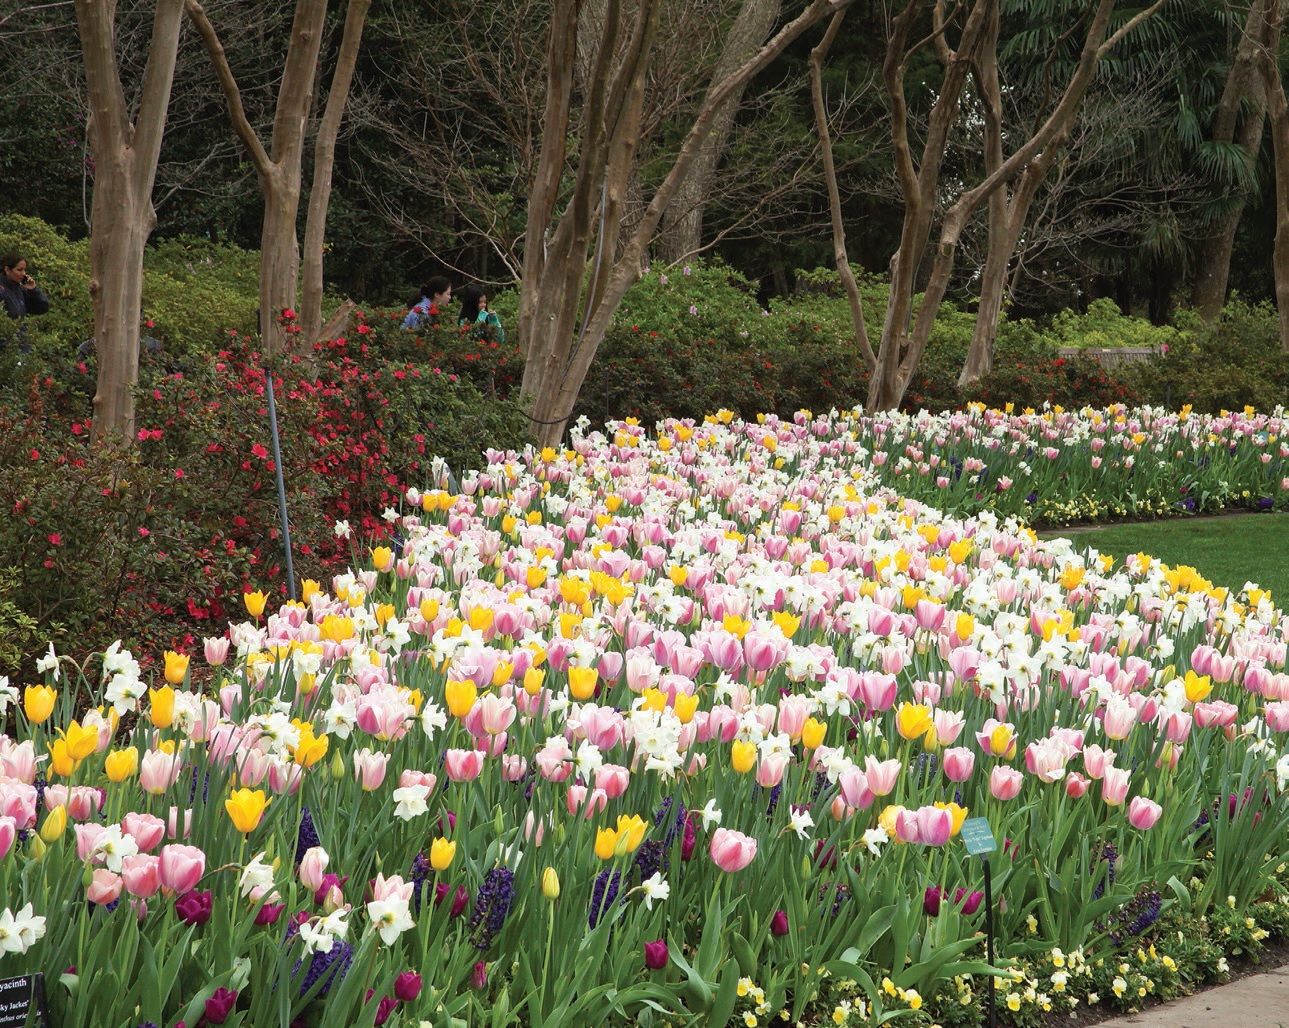 Delight in fields of colorful blooms at the Dallas Arboretum and Botanical Garden PHOTO: COURTESY OF DALLAS ARBORETUM AND BOTANICAL GARDEN